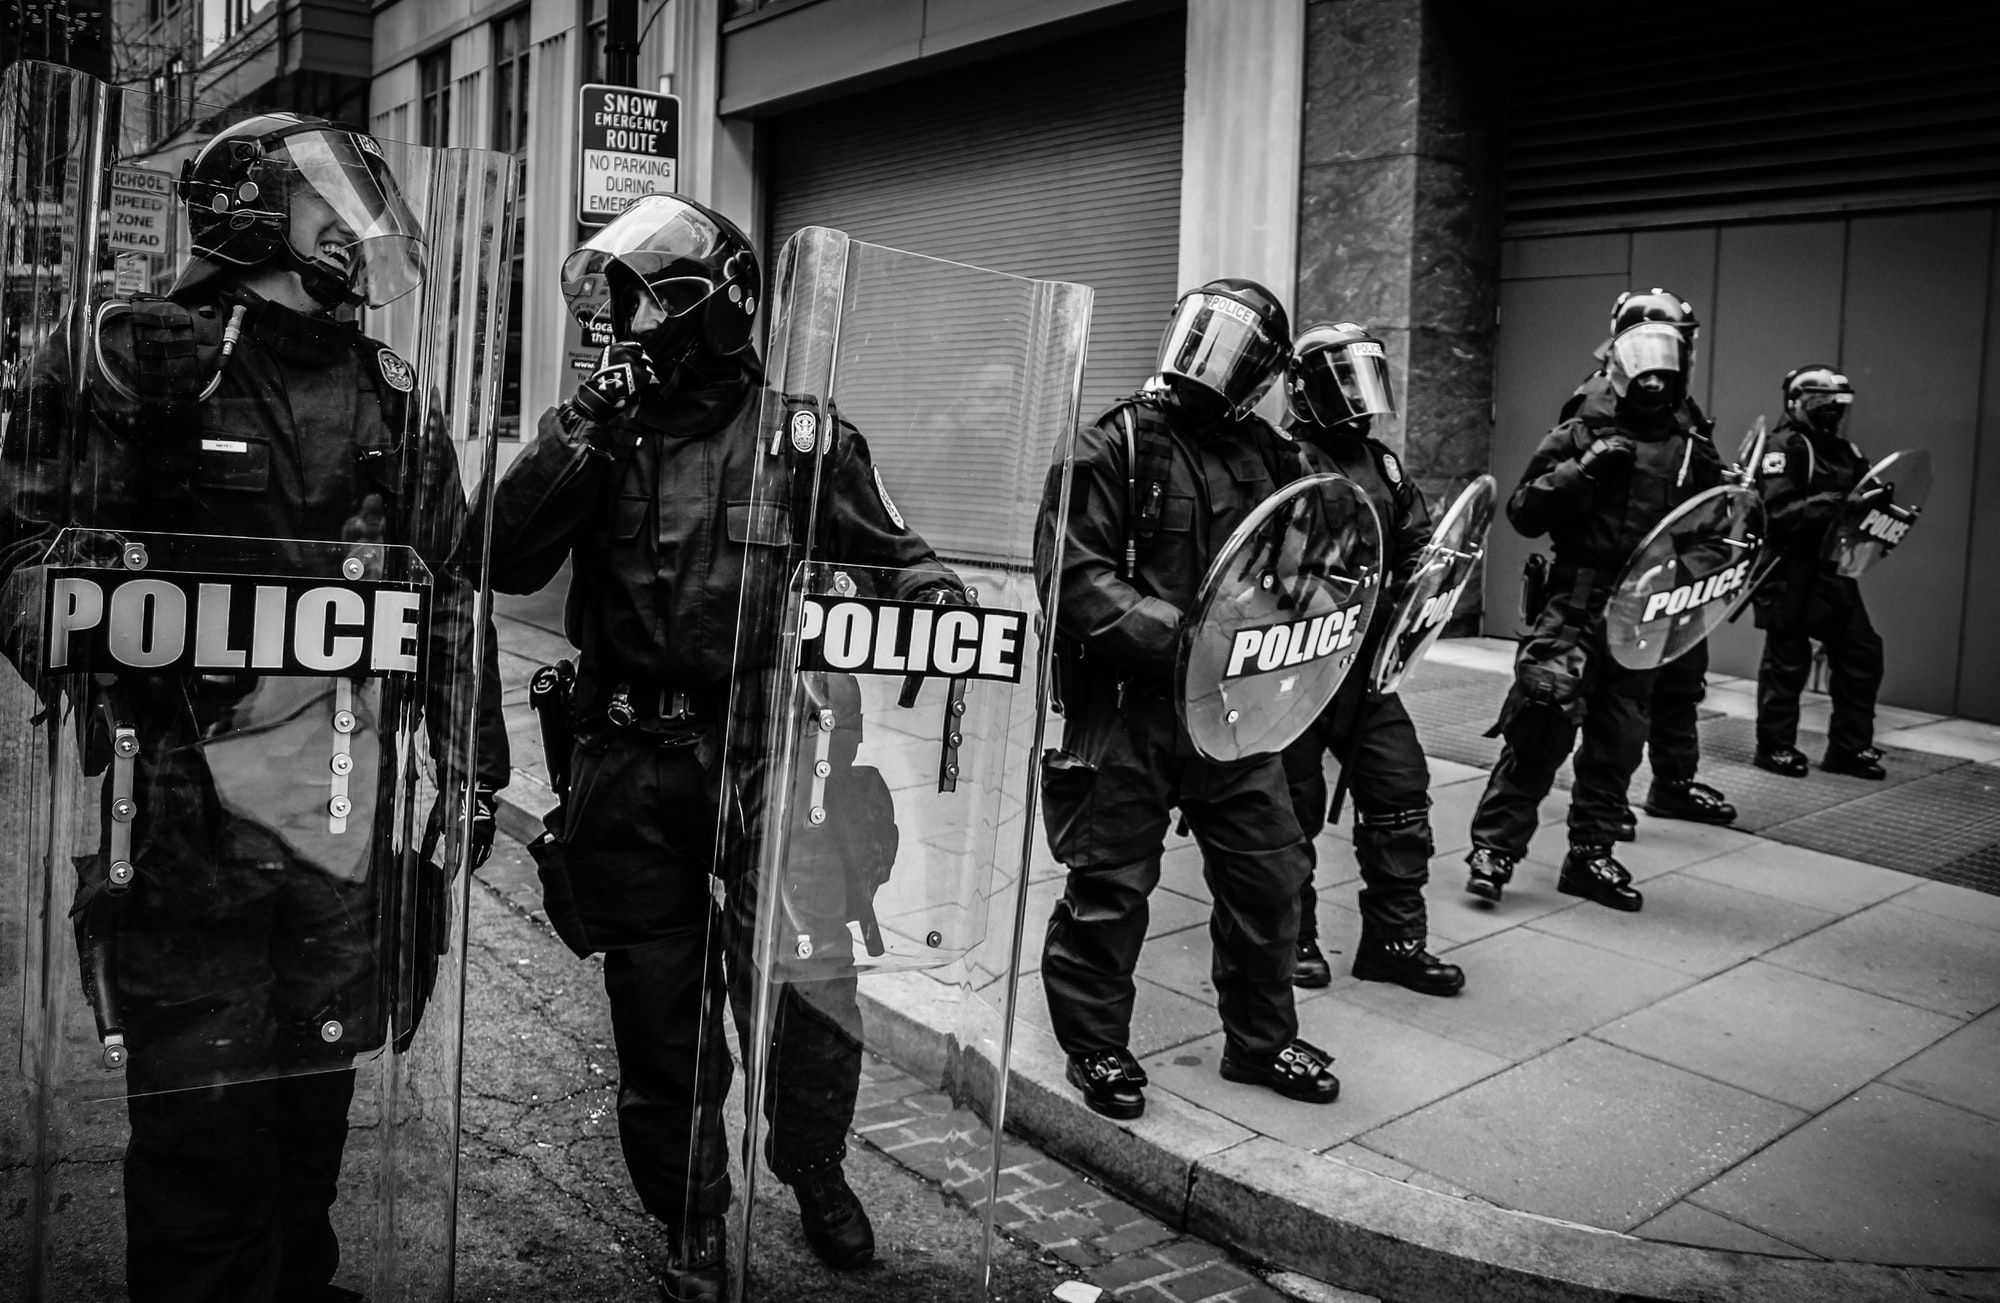 Two police laughing in full riot gear during the presidential inauguration. One of the most poignant photos I took that day.